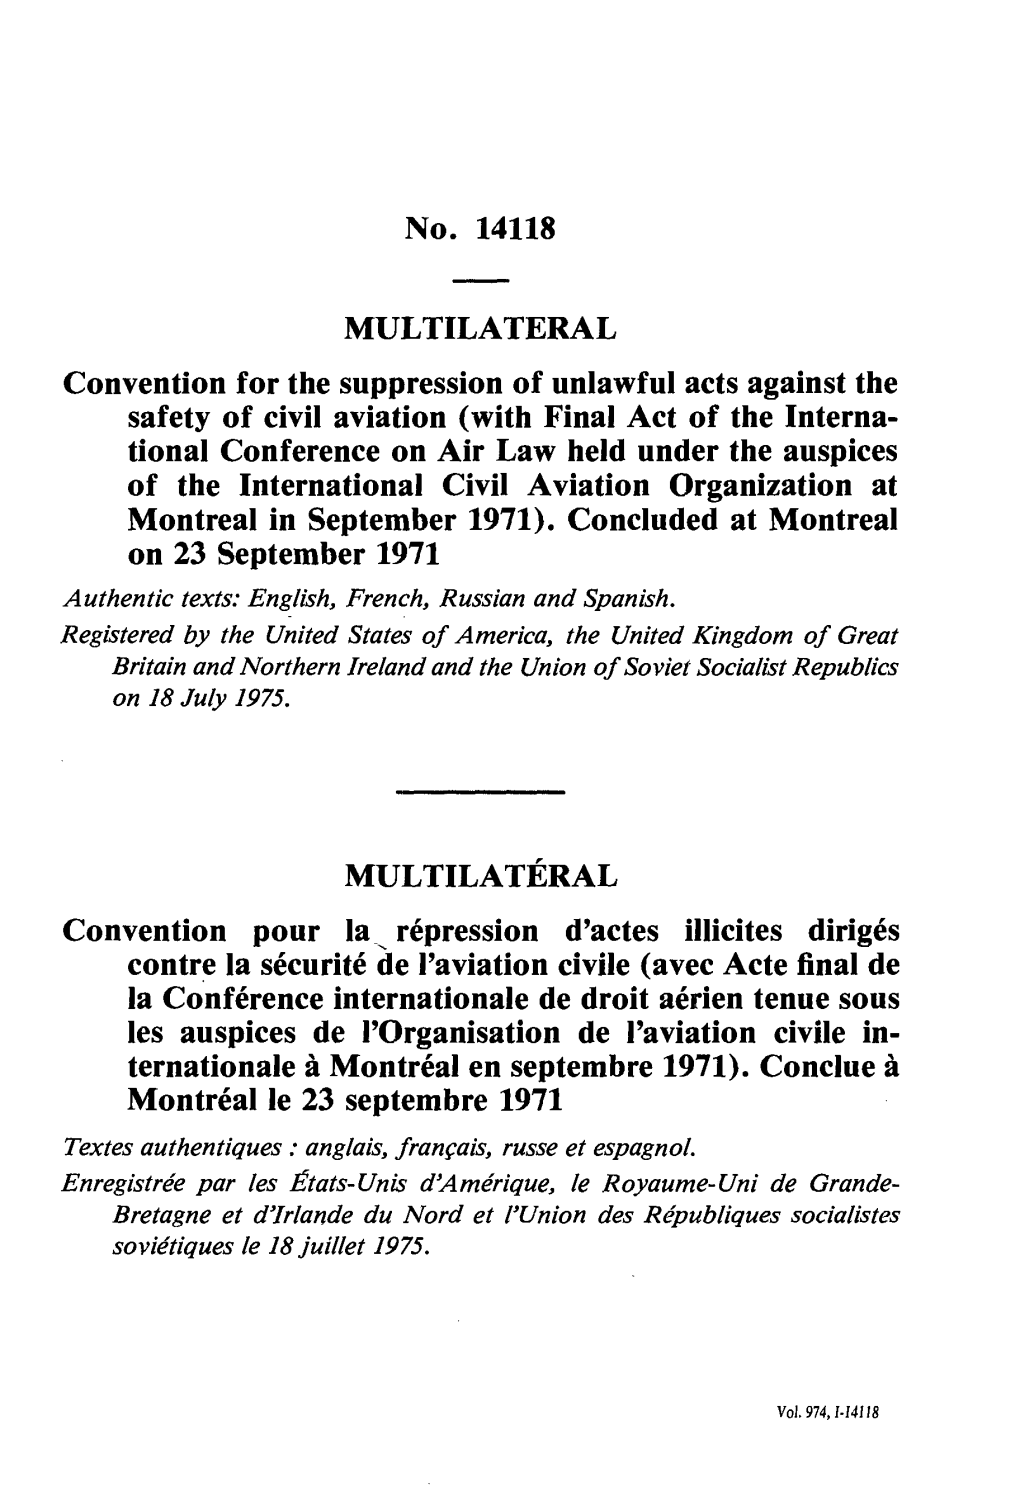 Convention for the Suppression of Unlawful Acts Against the Safety Of